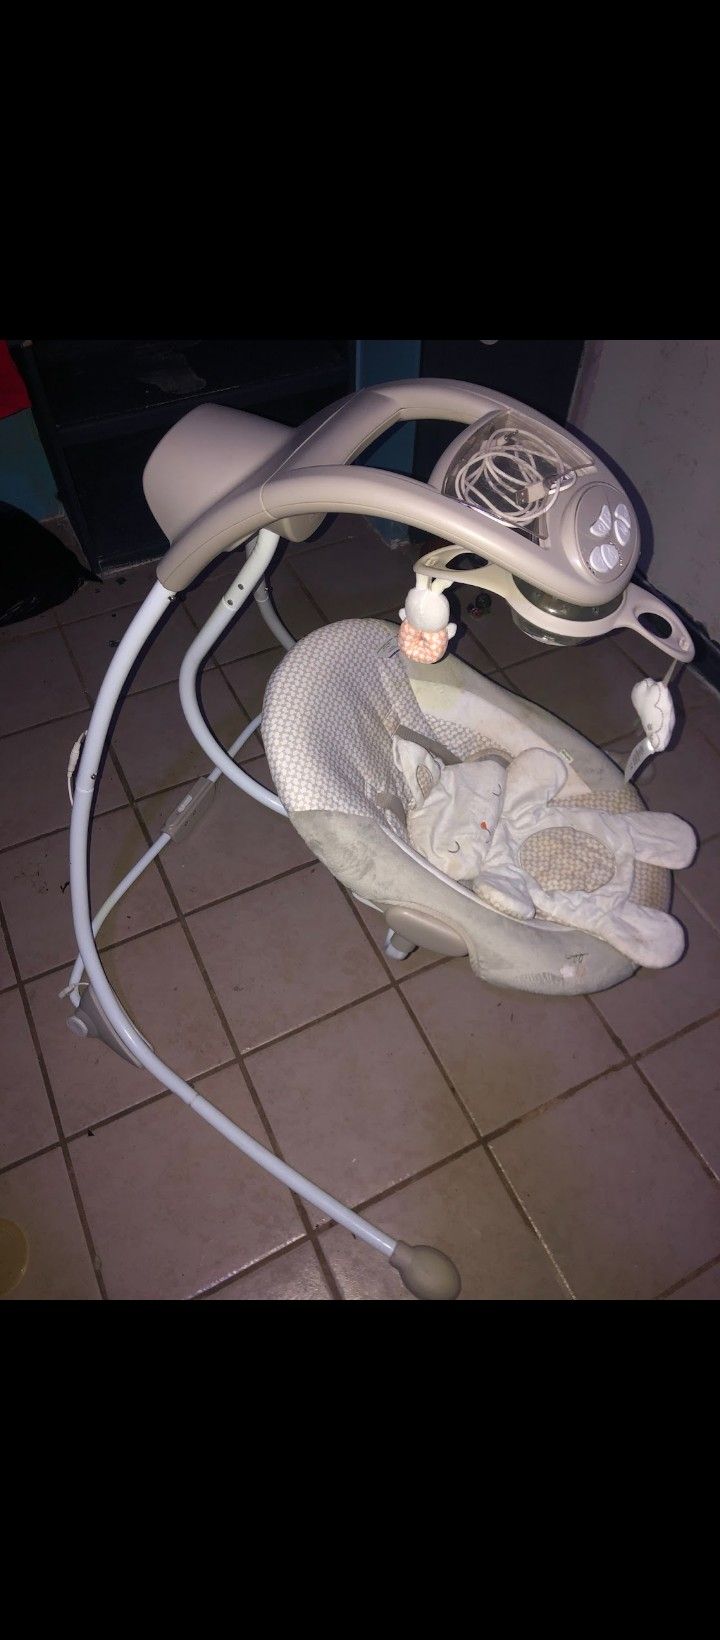 Baby Swing - Make An Offer No Lower Than $100